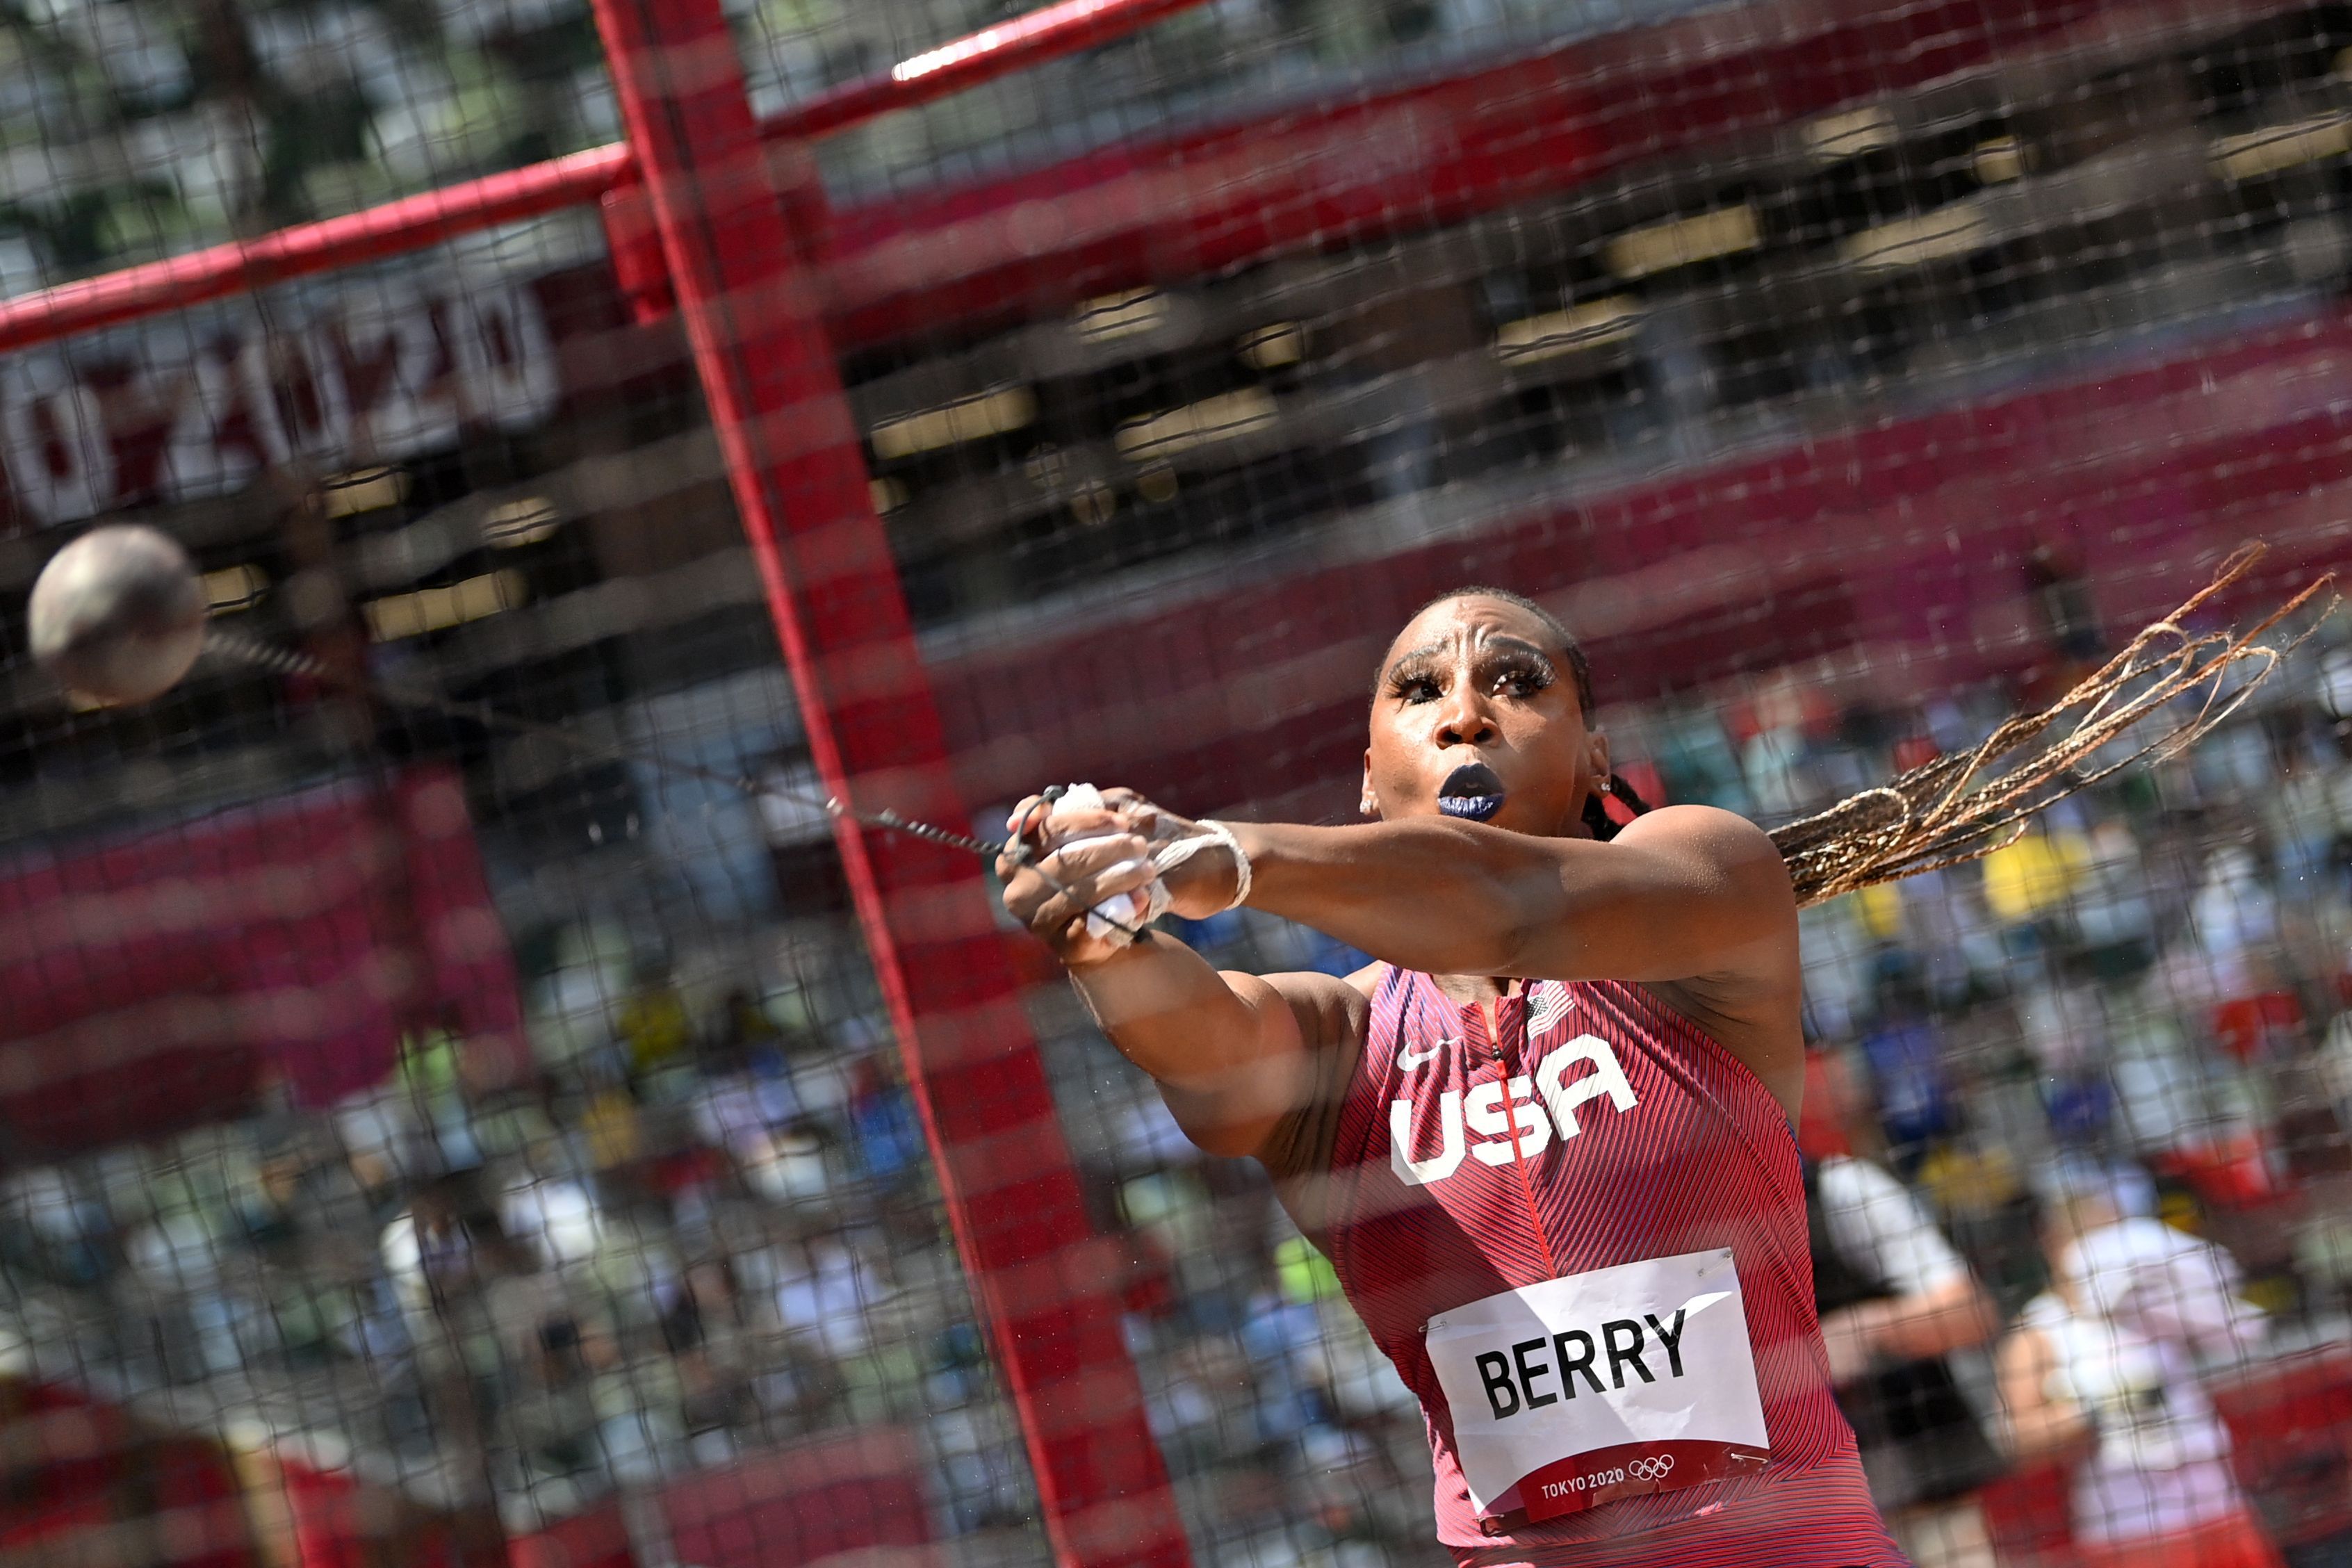  USA's Gwen Berry competes in the women's hammer throw qualification during the Tokyo 2020 Olympic Games at the Olympic Stadium in Tokyo on August 1